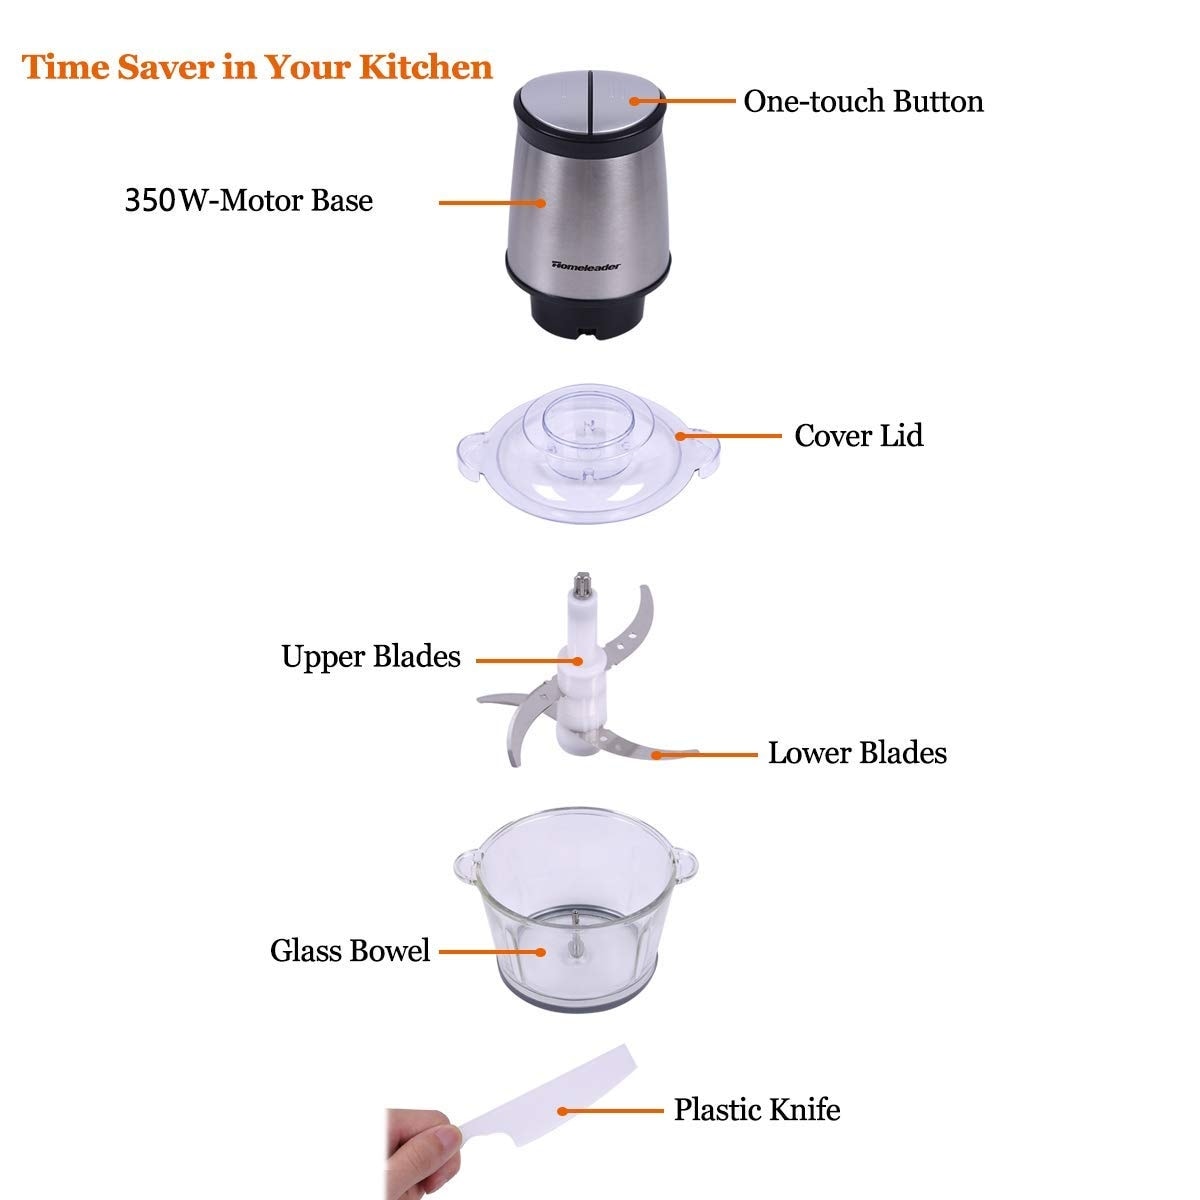 https://ak1.ostkcdn.com/images/products/is/images/direct/aebc564a6b6e319b84caee4e339a12c5ffdac47d/Electric-Food-Chopper%2C-8-Cup-Food-Processor-by-Homeleader%2C-2L-BPA-Free-Glass-Bowl-Blender-Grinder.jpg